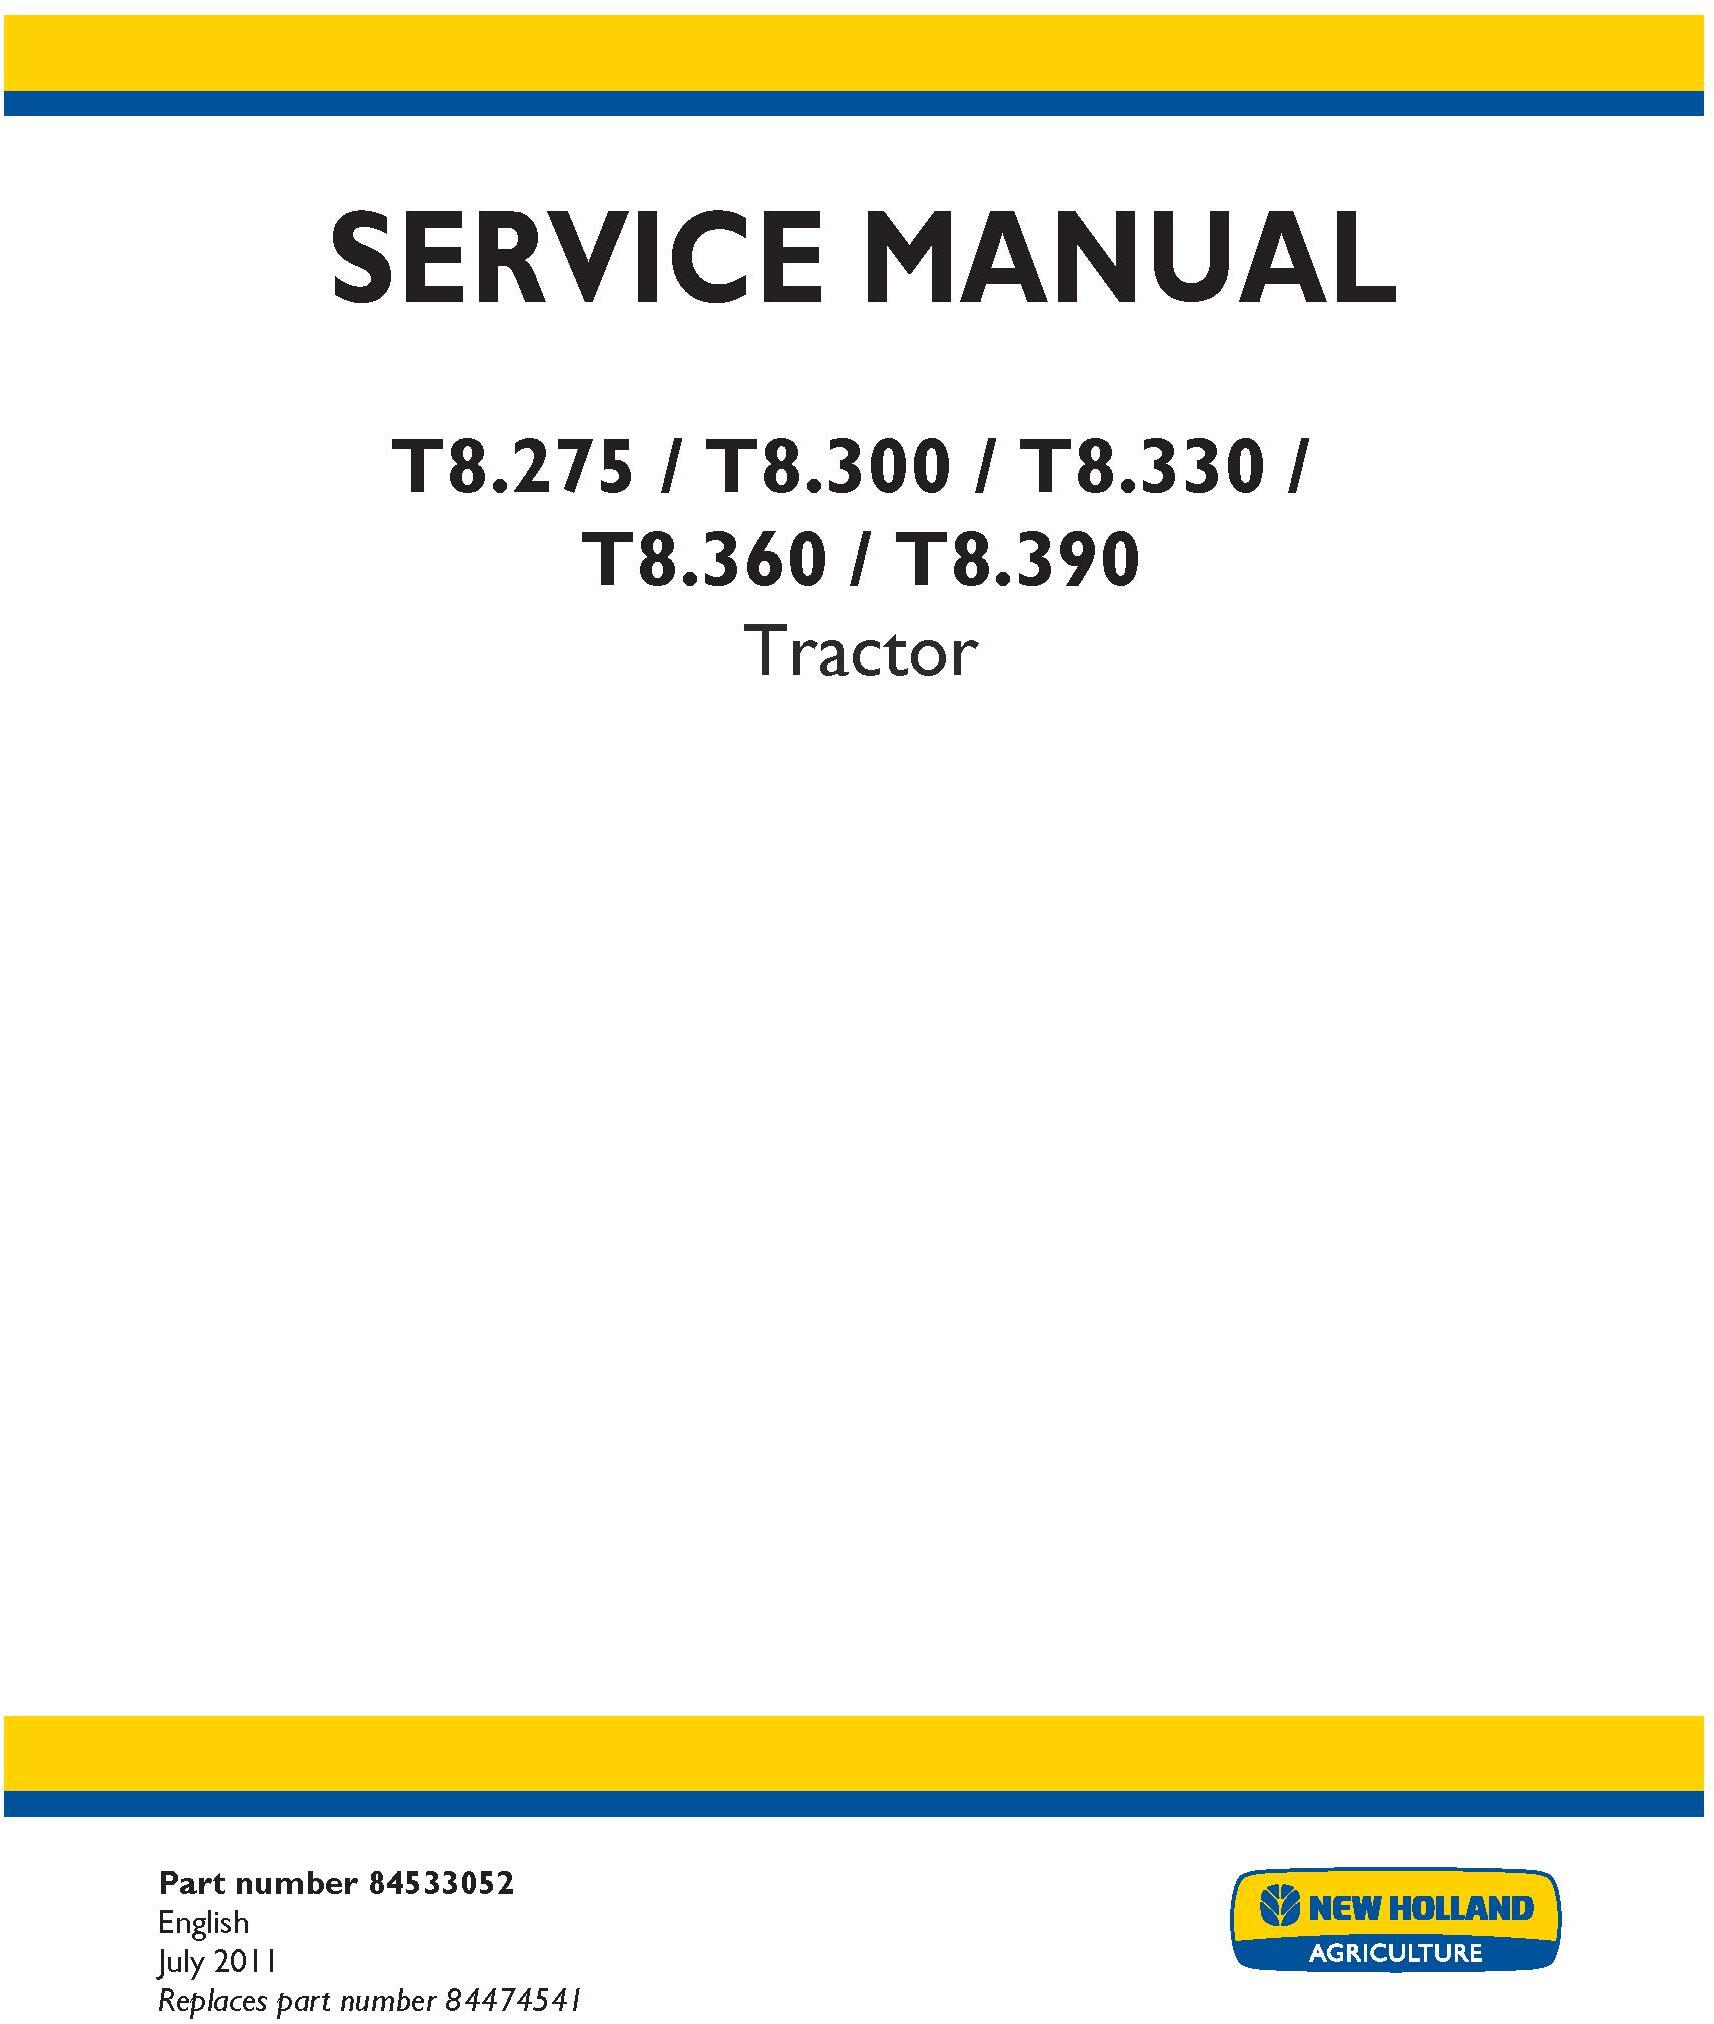 New Holland T8.275, T8.300, T8.330, T8.360, T8.390 Tractor Service Manual